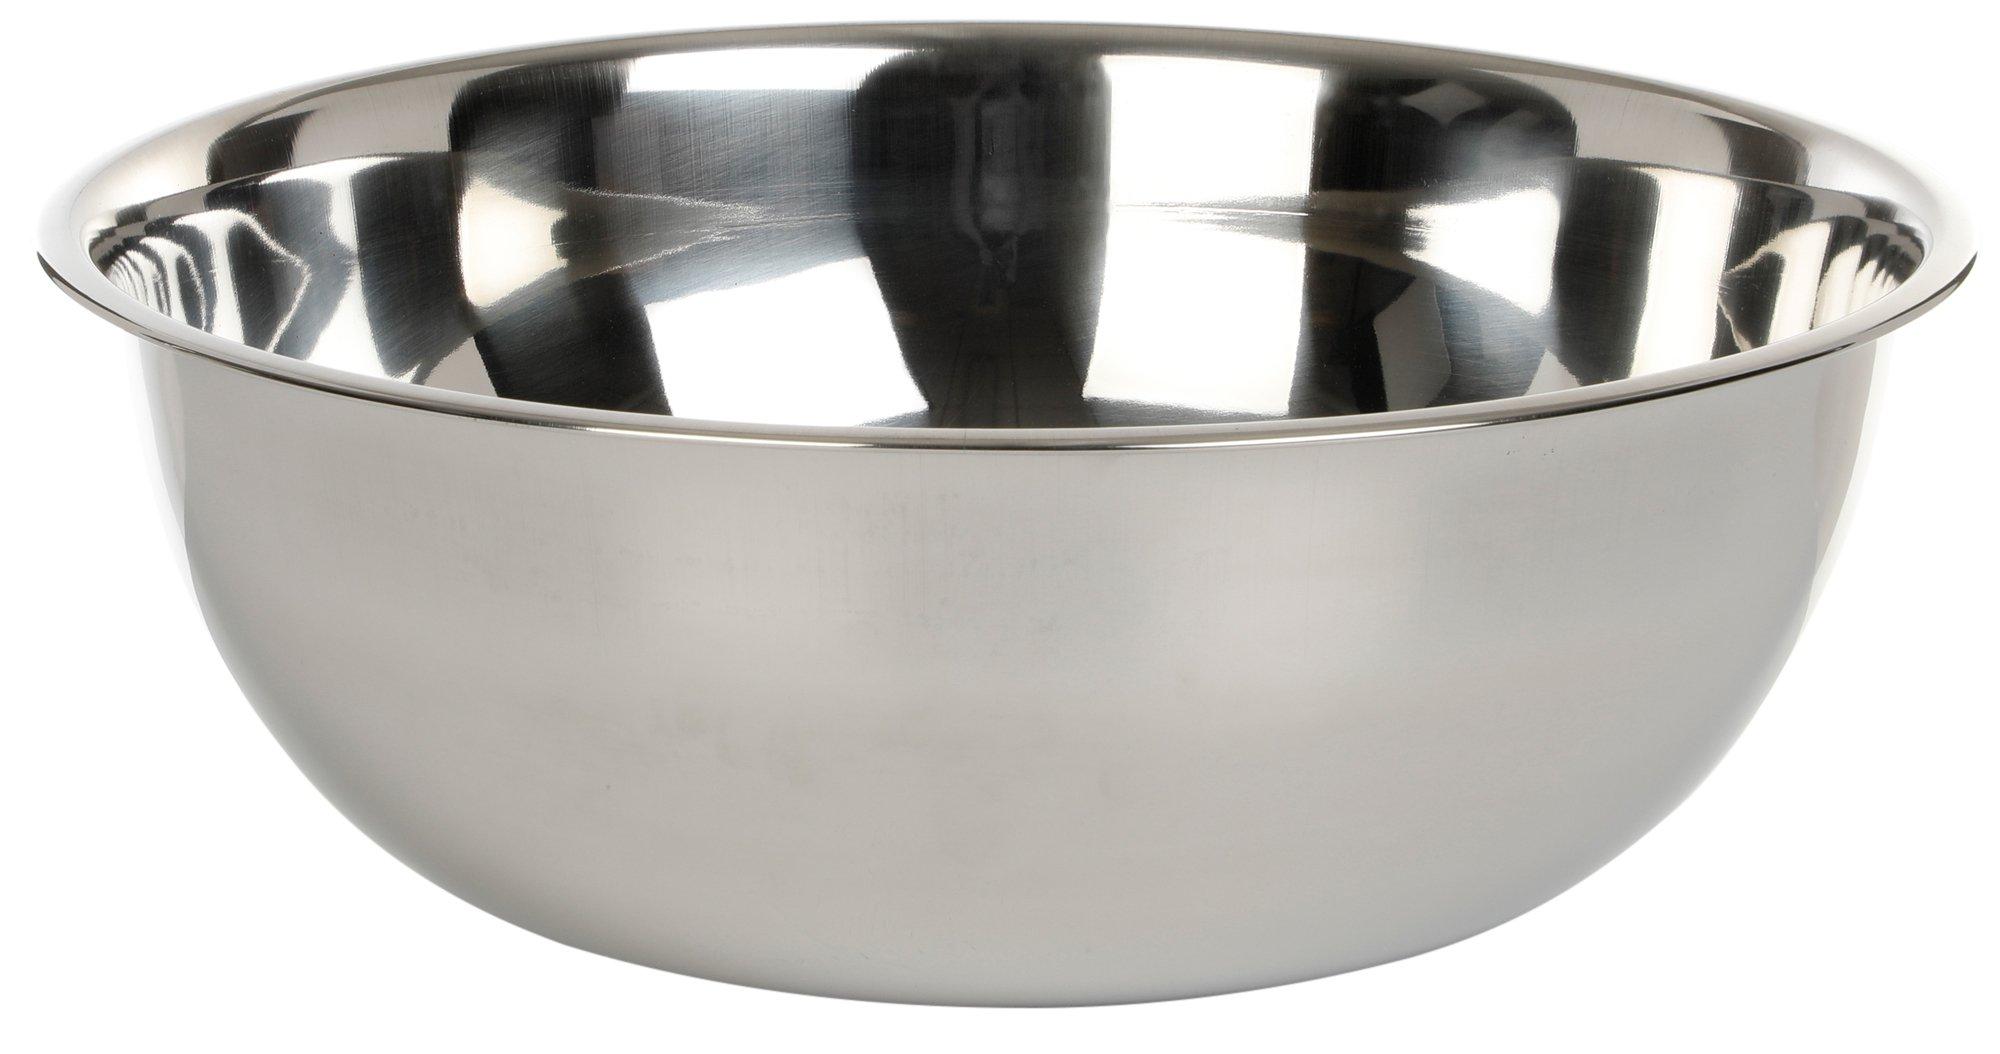 18 Quart Stainless Steel Mixing Bowl